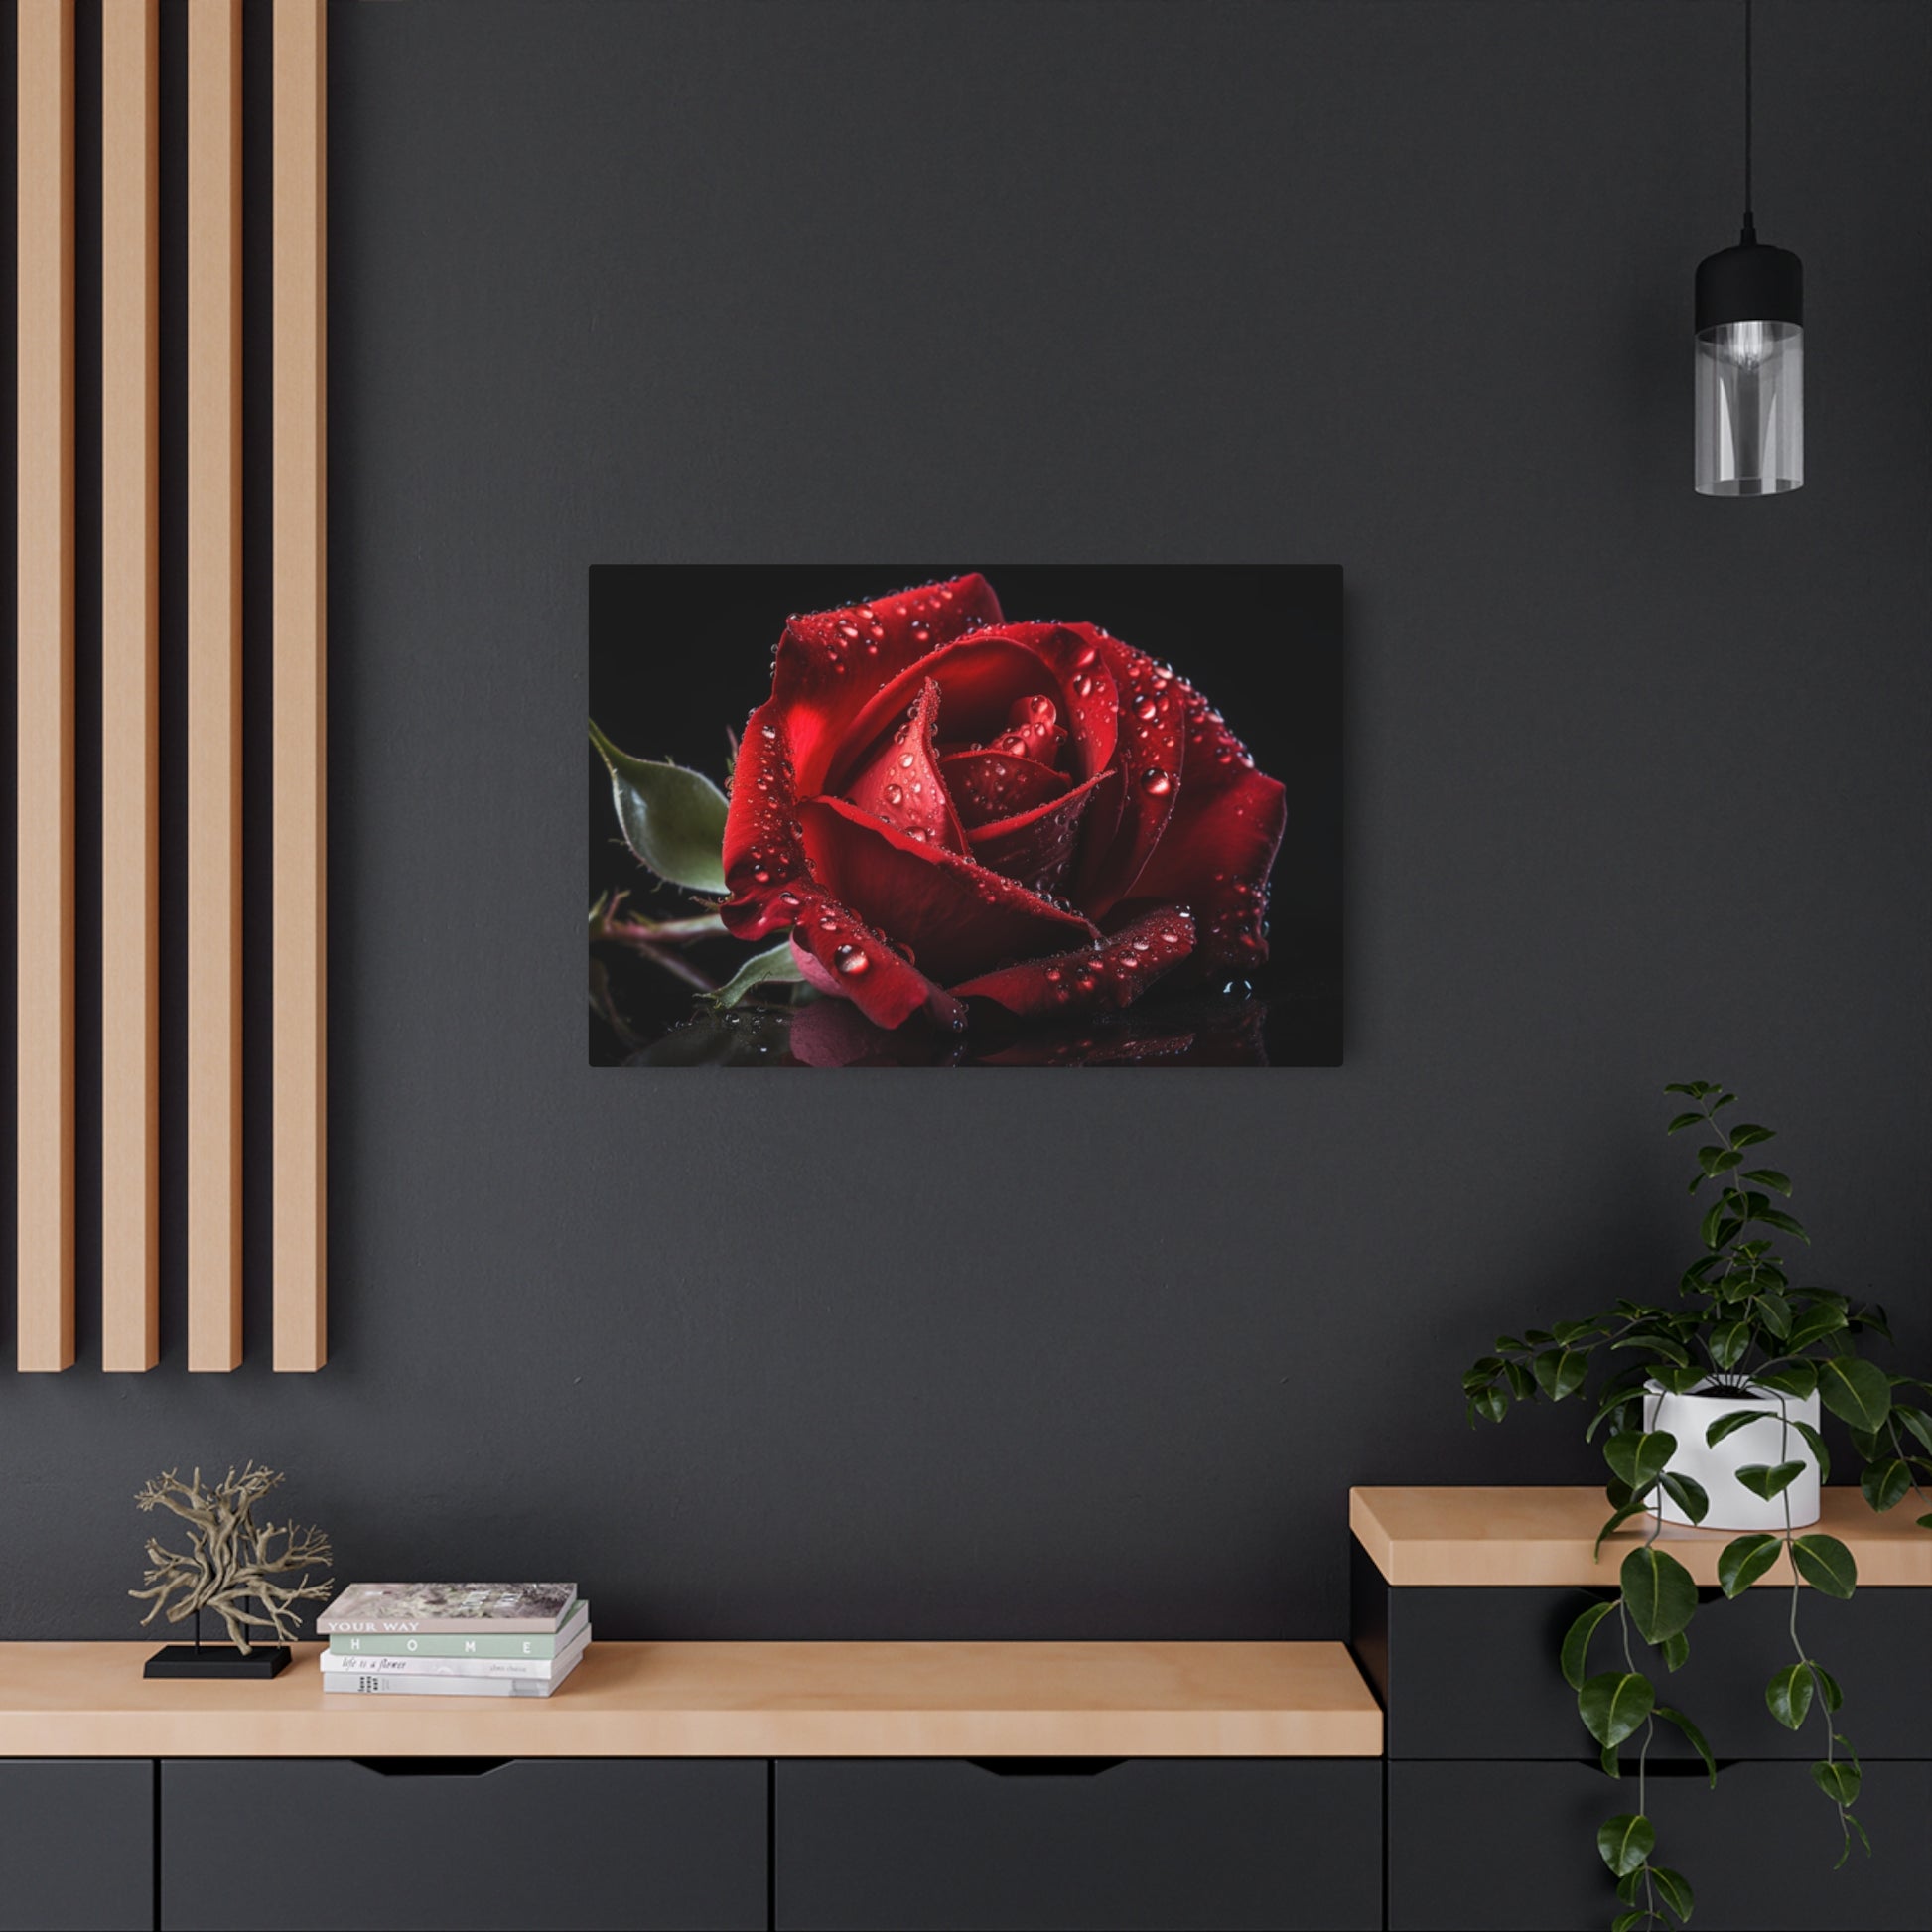 Print of a red rose over metal sign